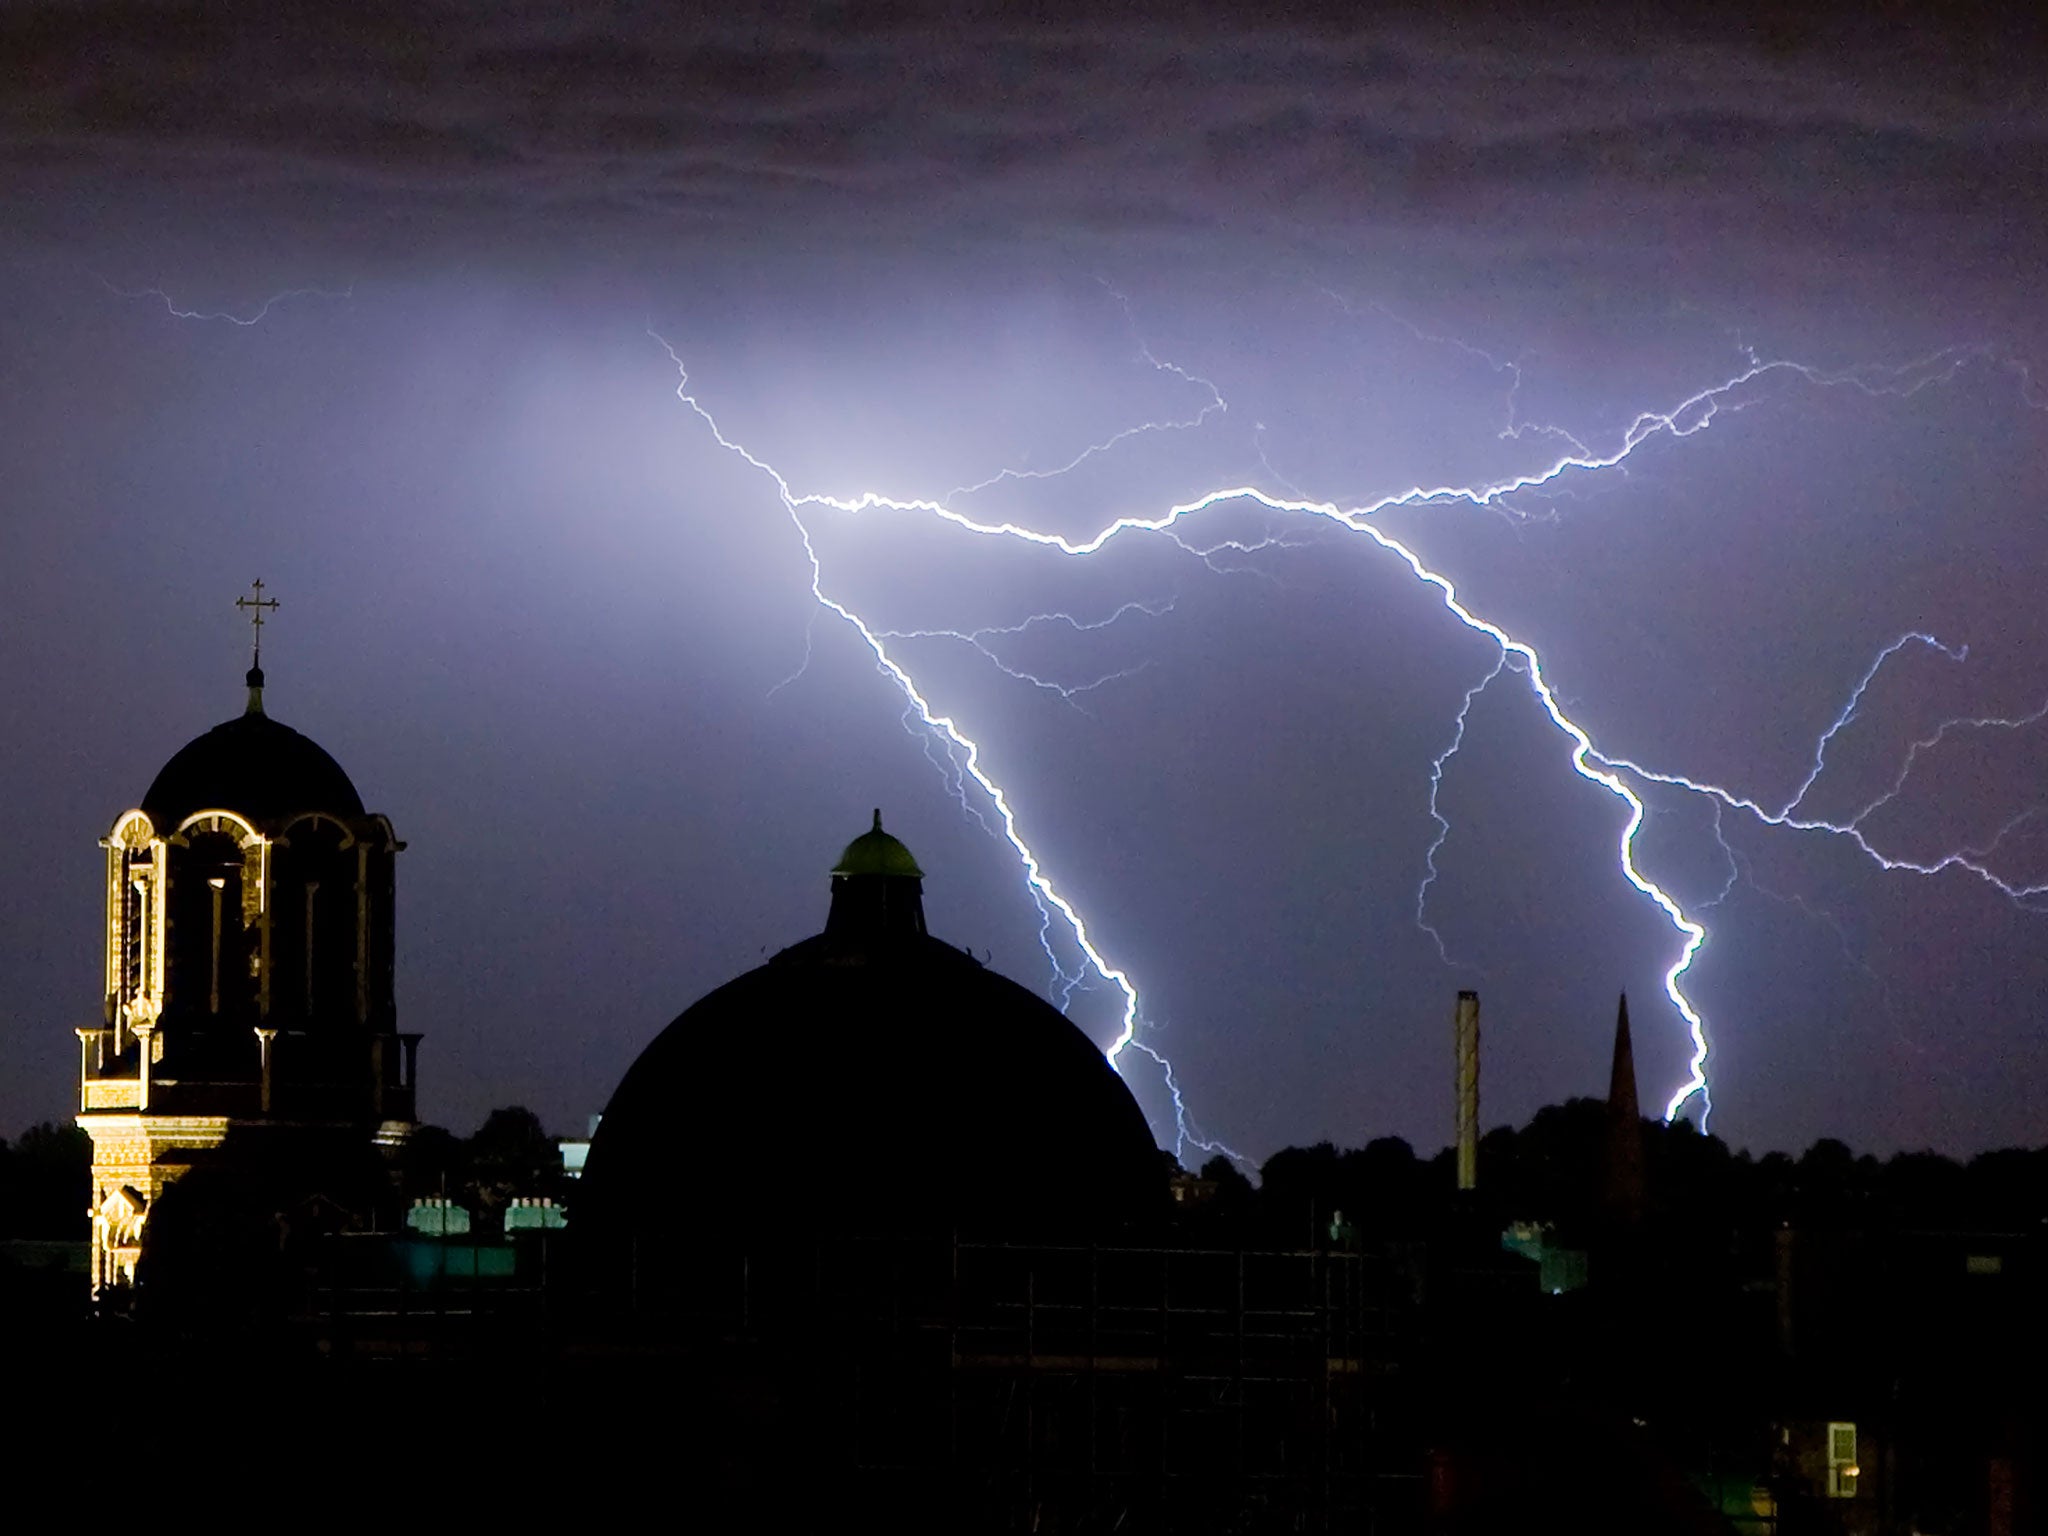 Lightning flashes in the night sky over South London, England